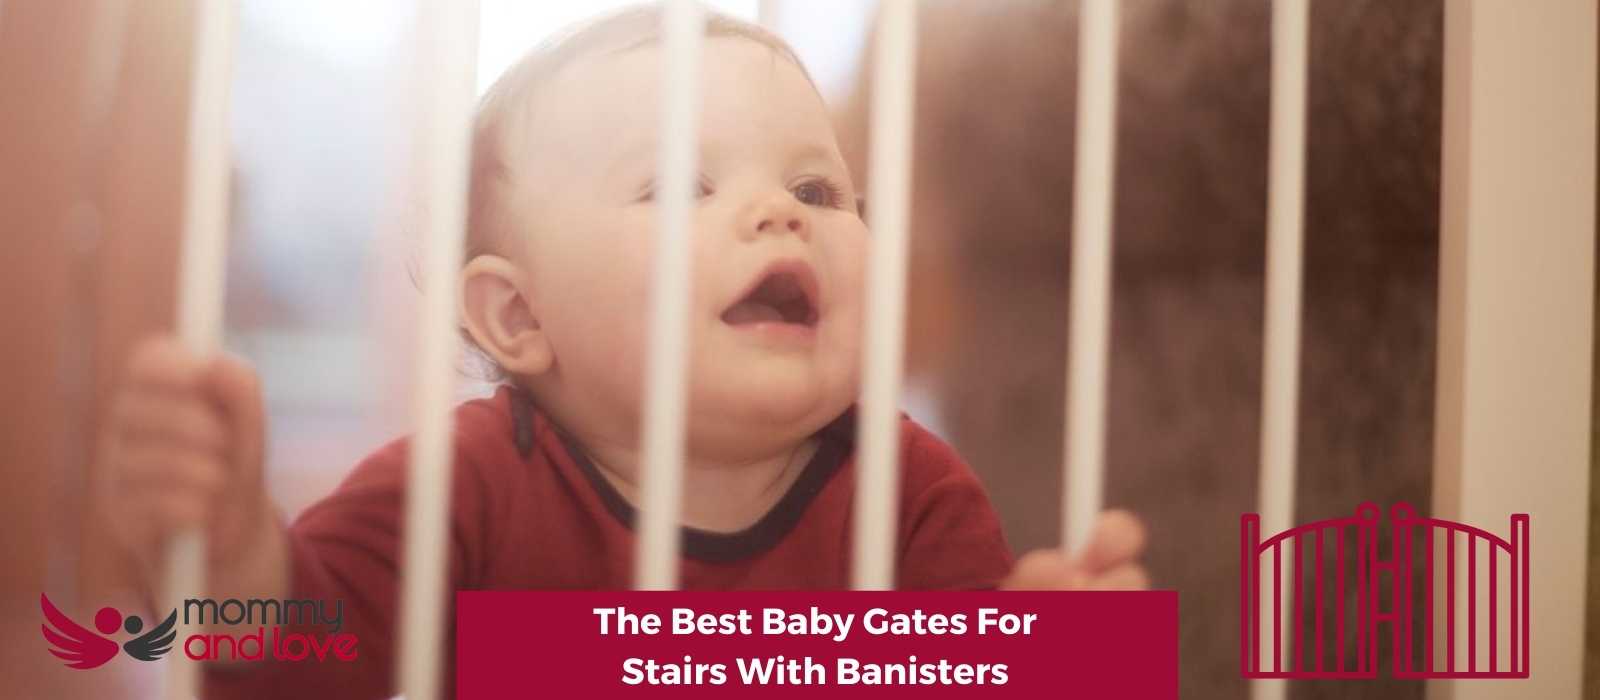 The Best Baby Gates For Stairs With Banisters